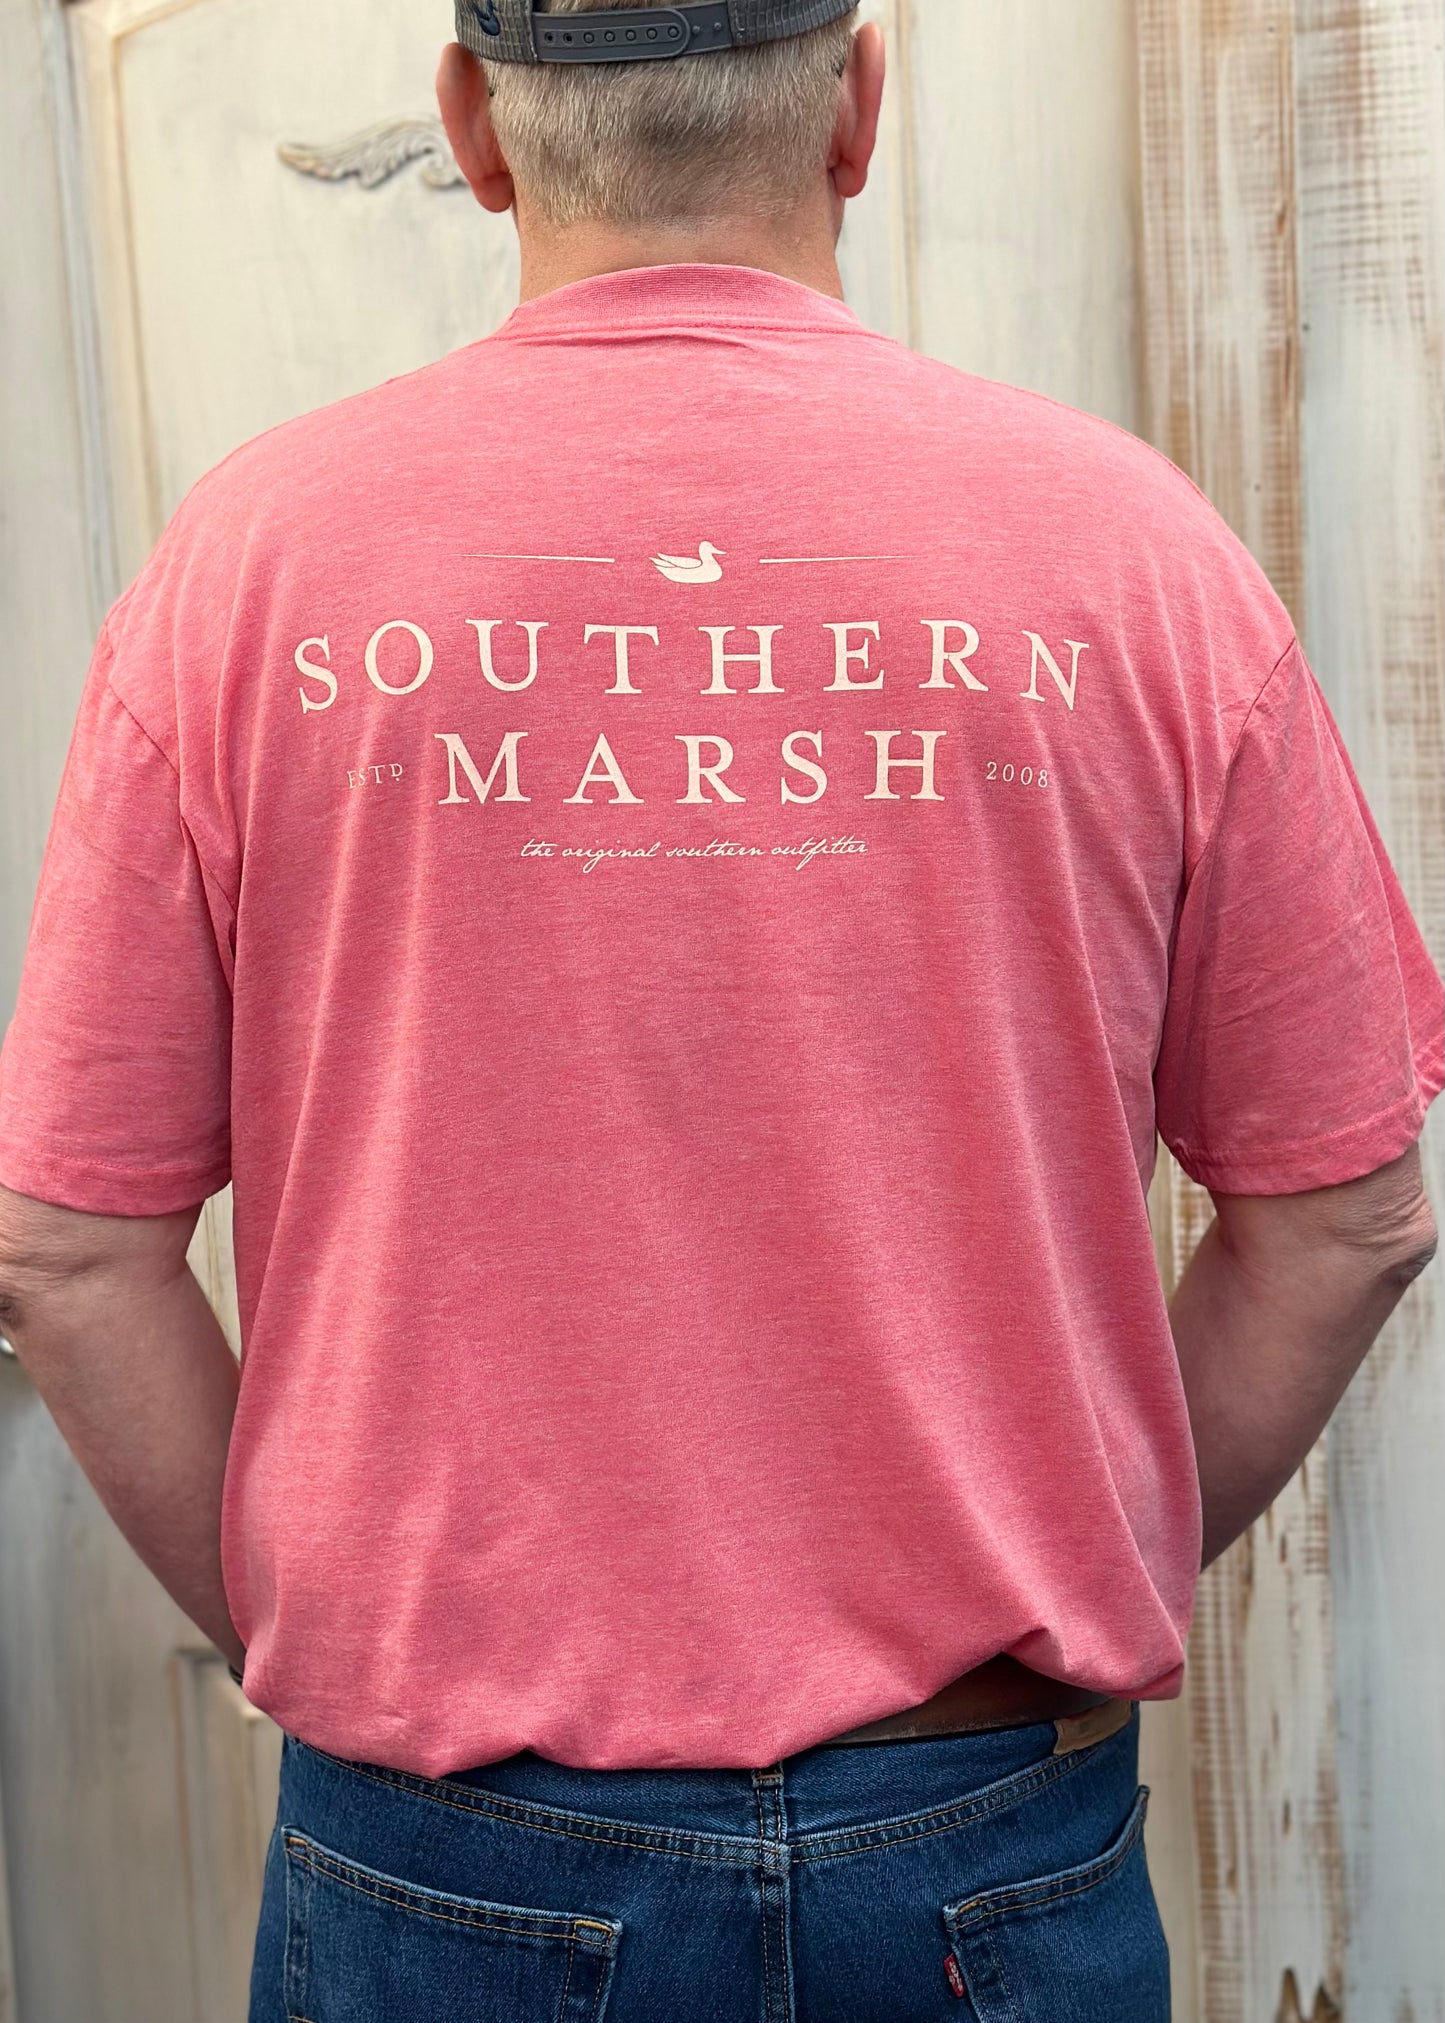 Jim wearing Southern Marsh Seawash Tee - Classic - Strawberry Fizz - Back View. Jimberly's Boutique Olive Branch MS